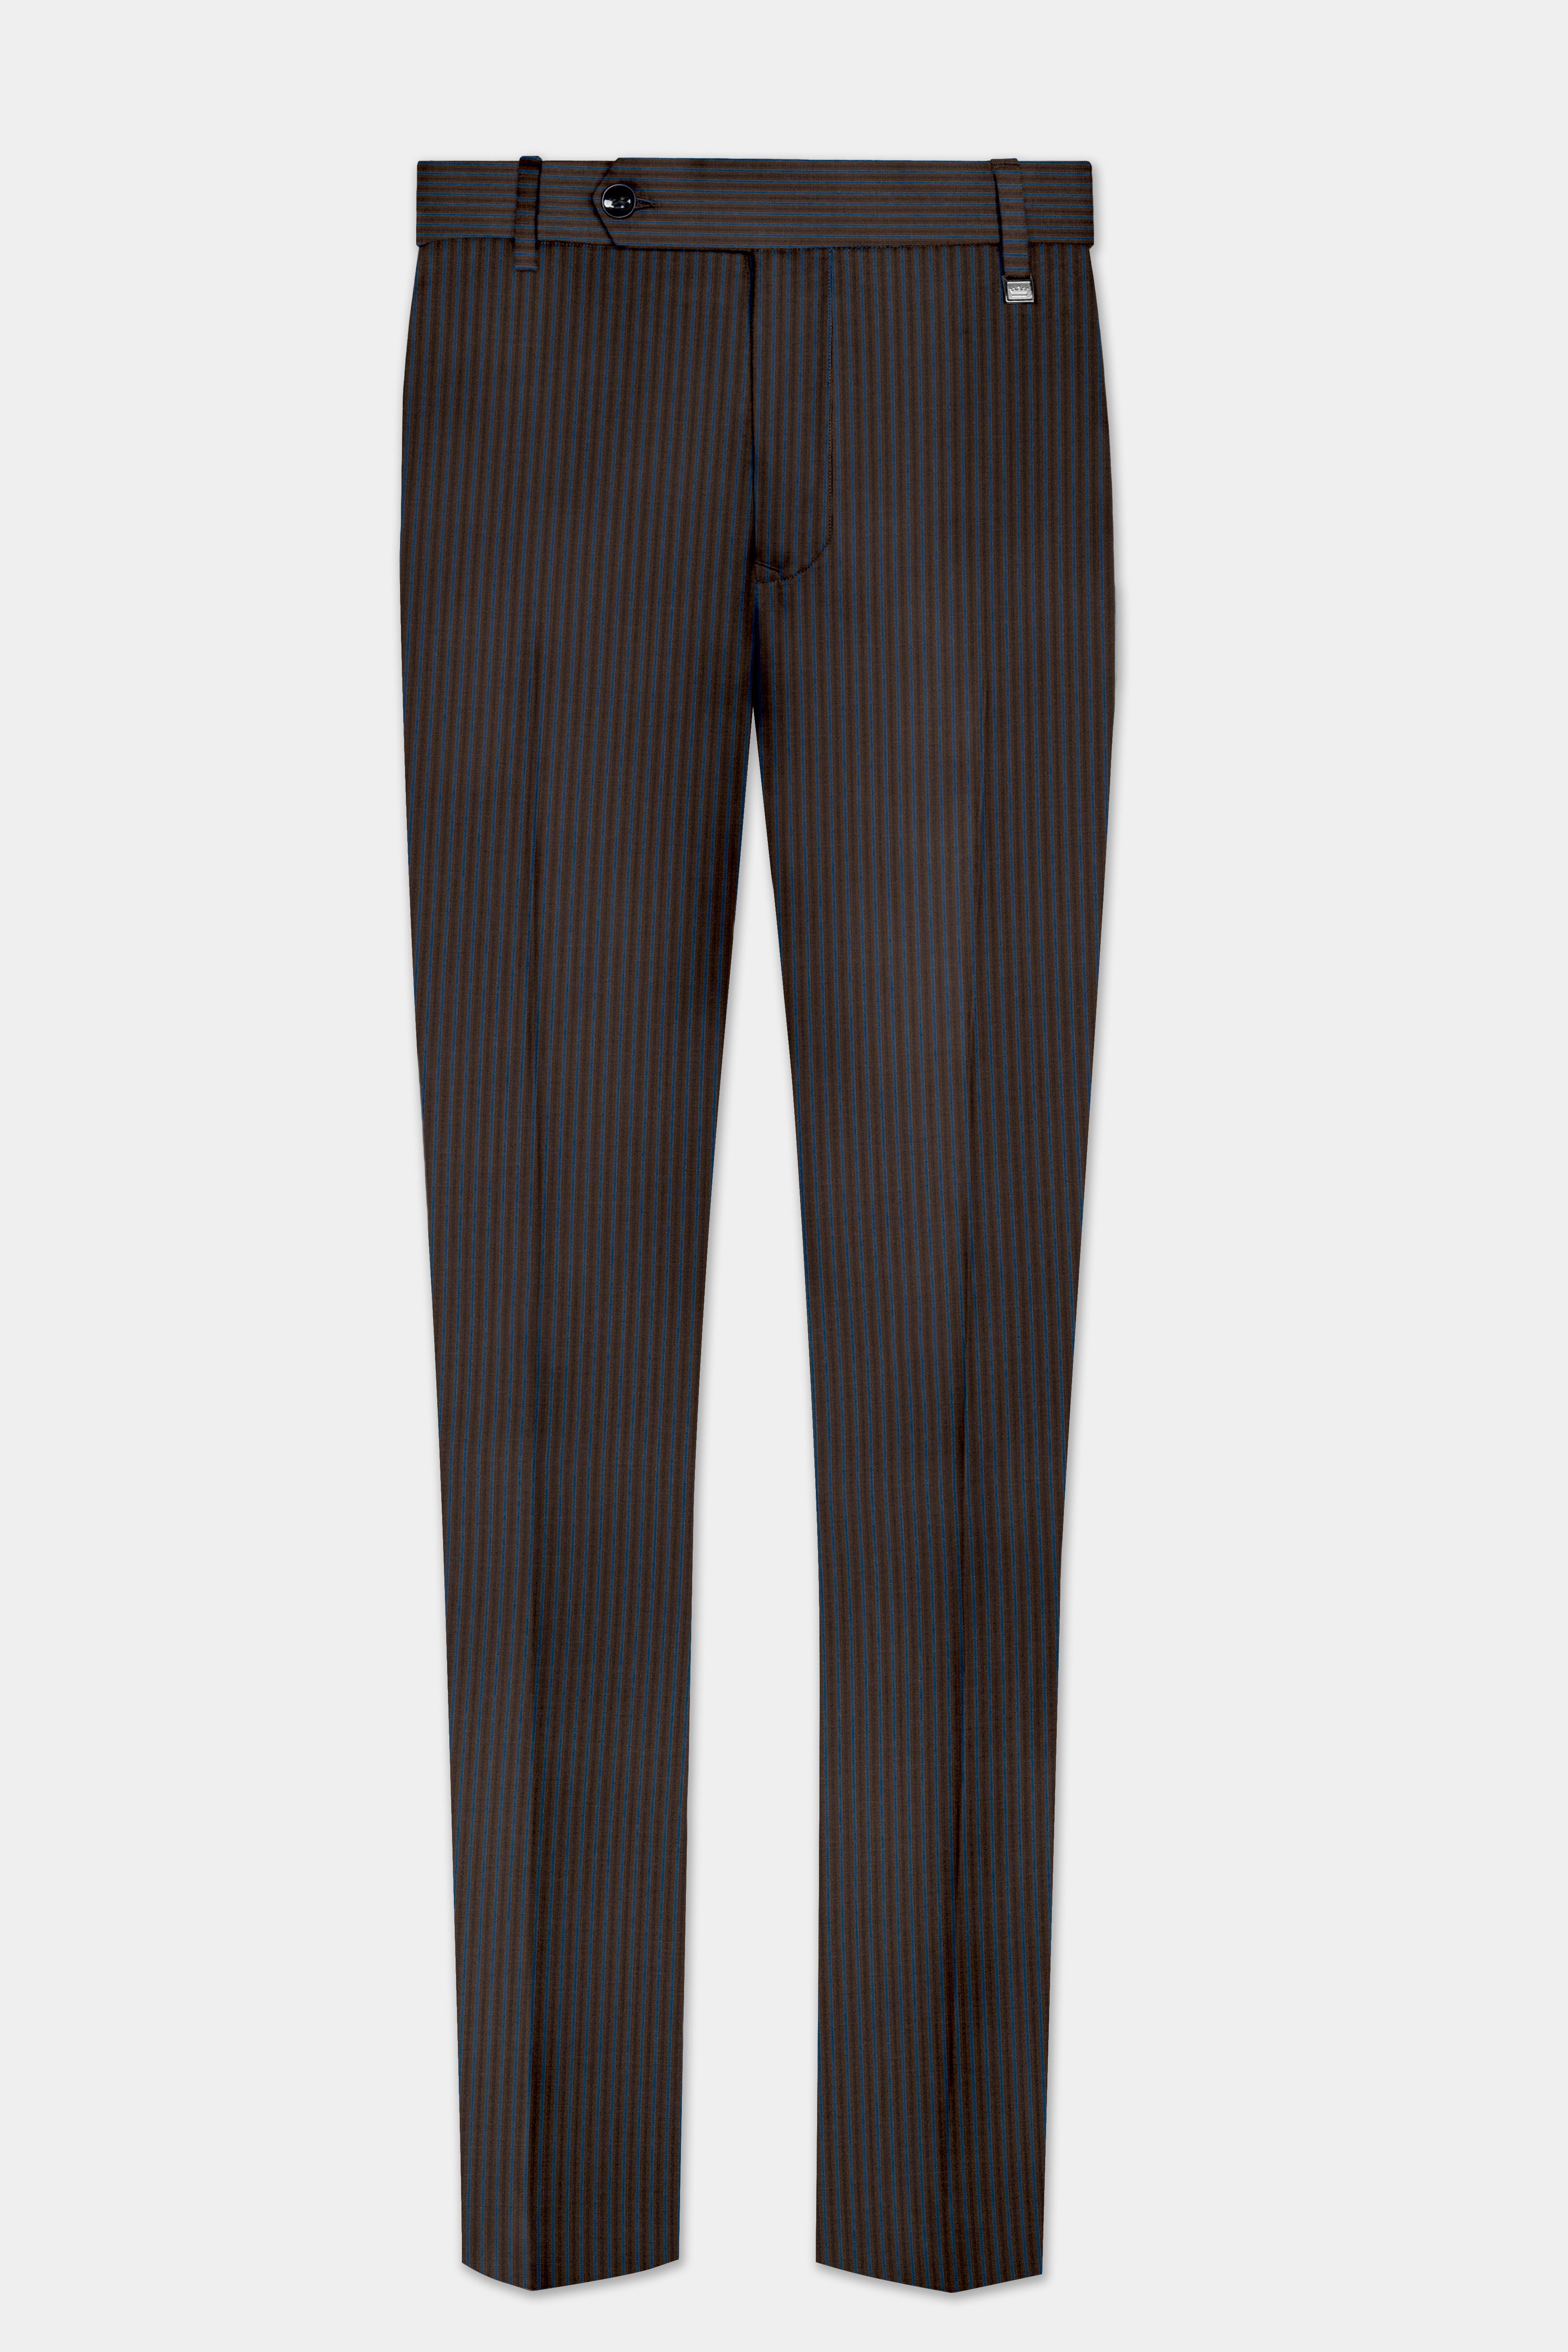 Eclipse Brown with Kashmir Blue Striped Wool Blend Suit